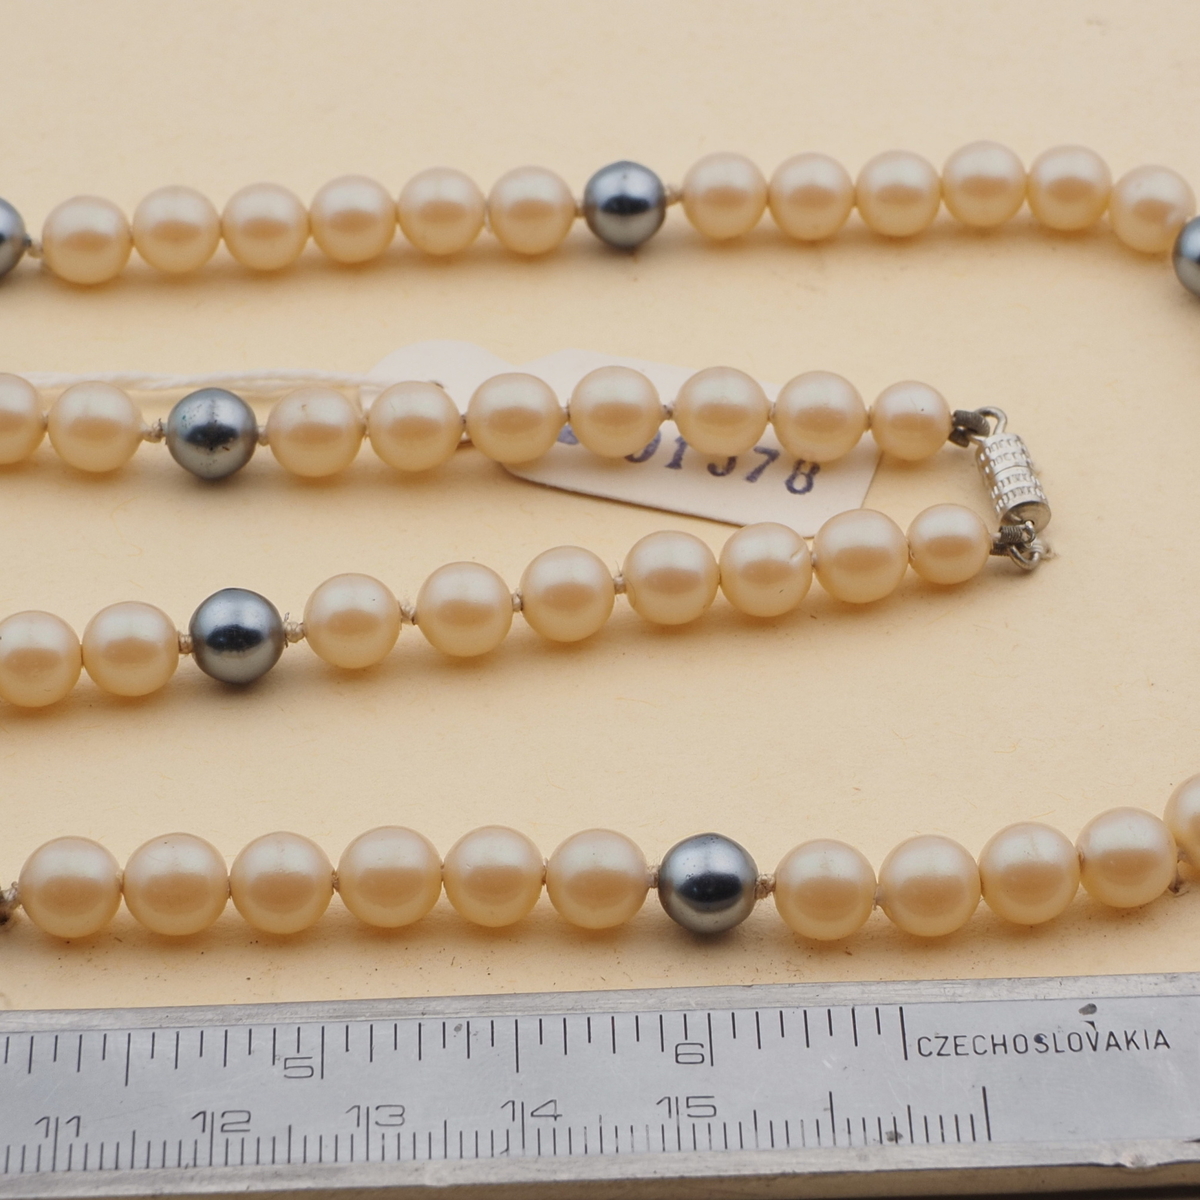 Vintage Czech knotted necklace pearl glass beads 